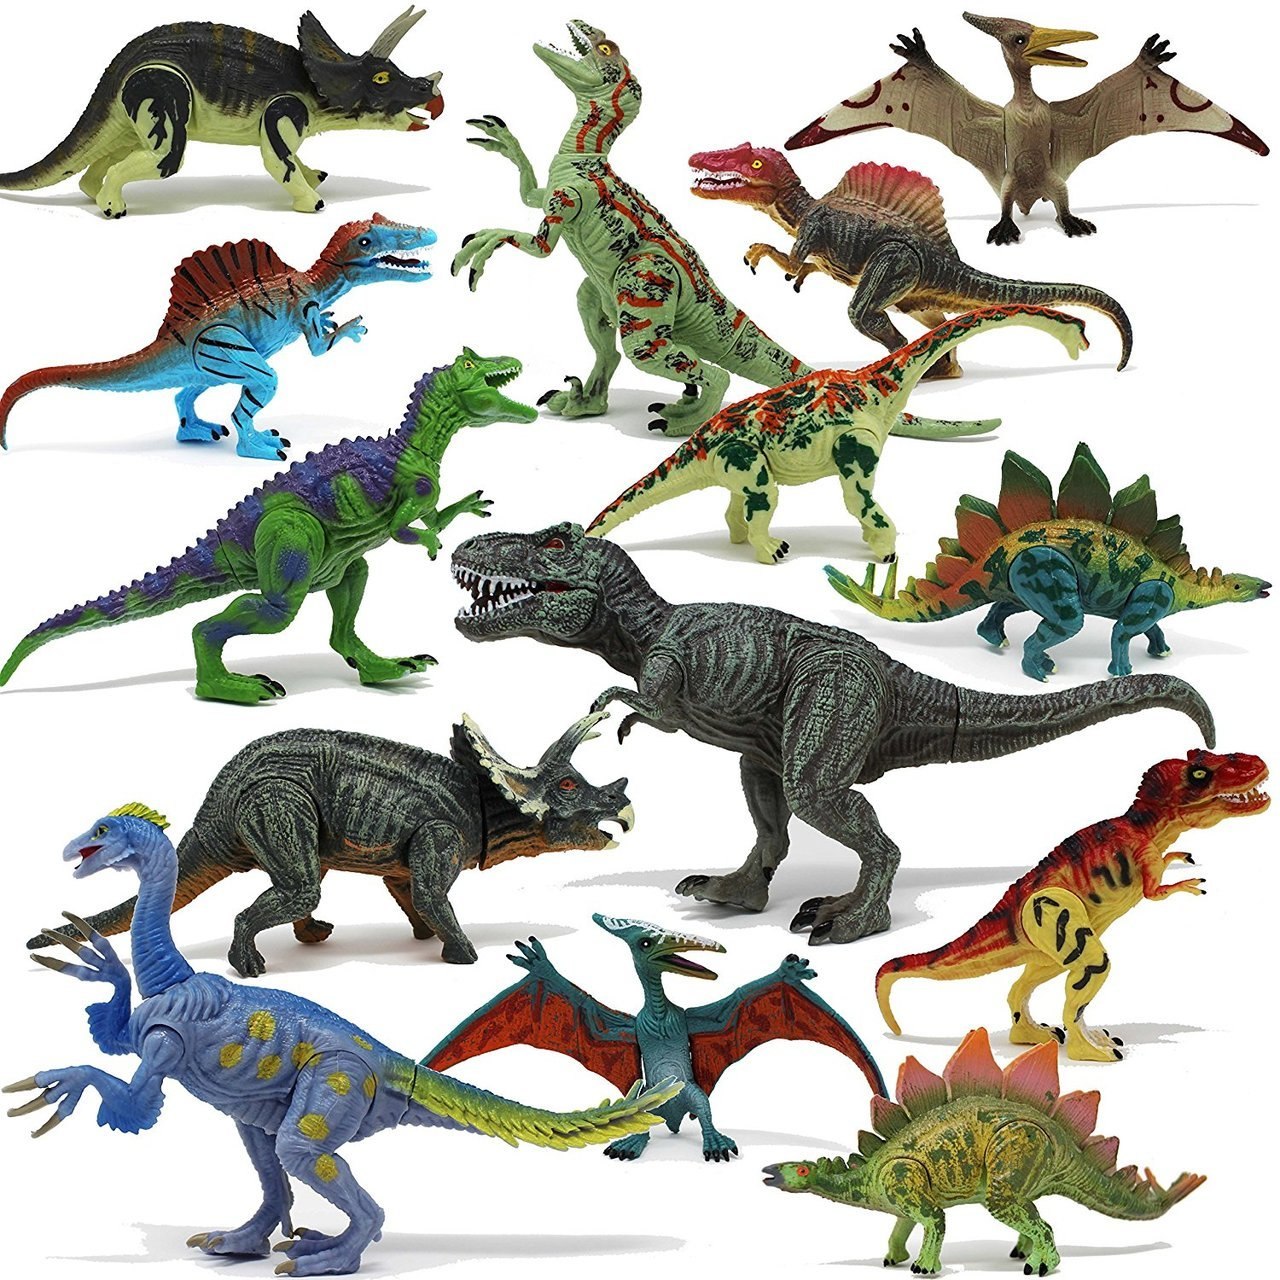 6″ to 9″ Realistic Dinosaur Figures with Movable Jaws, 18 Pcs